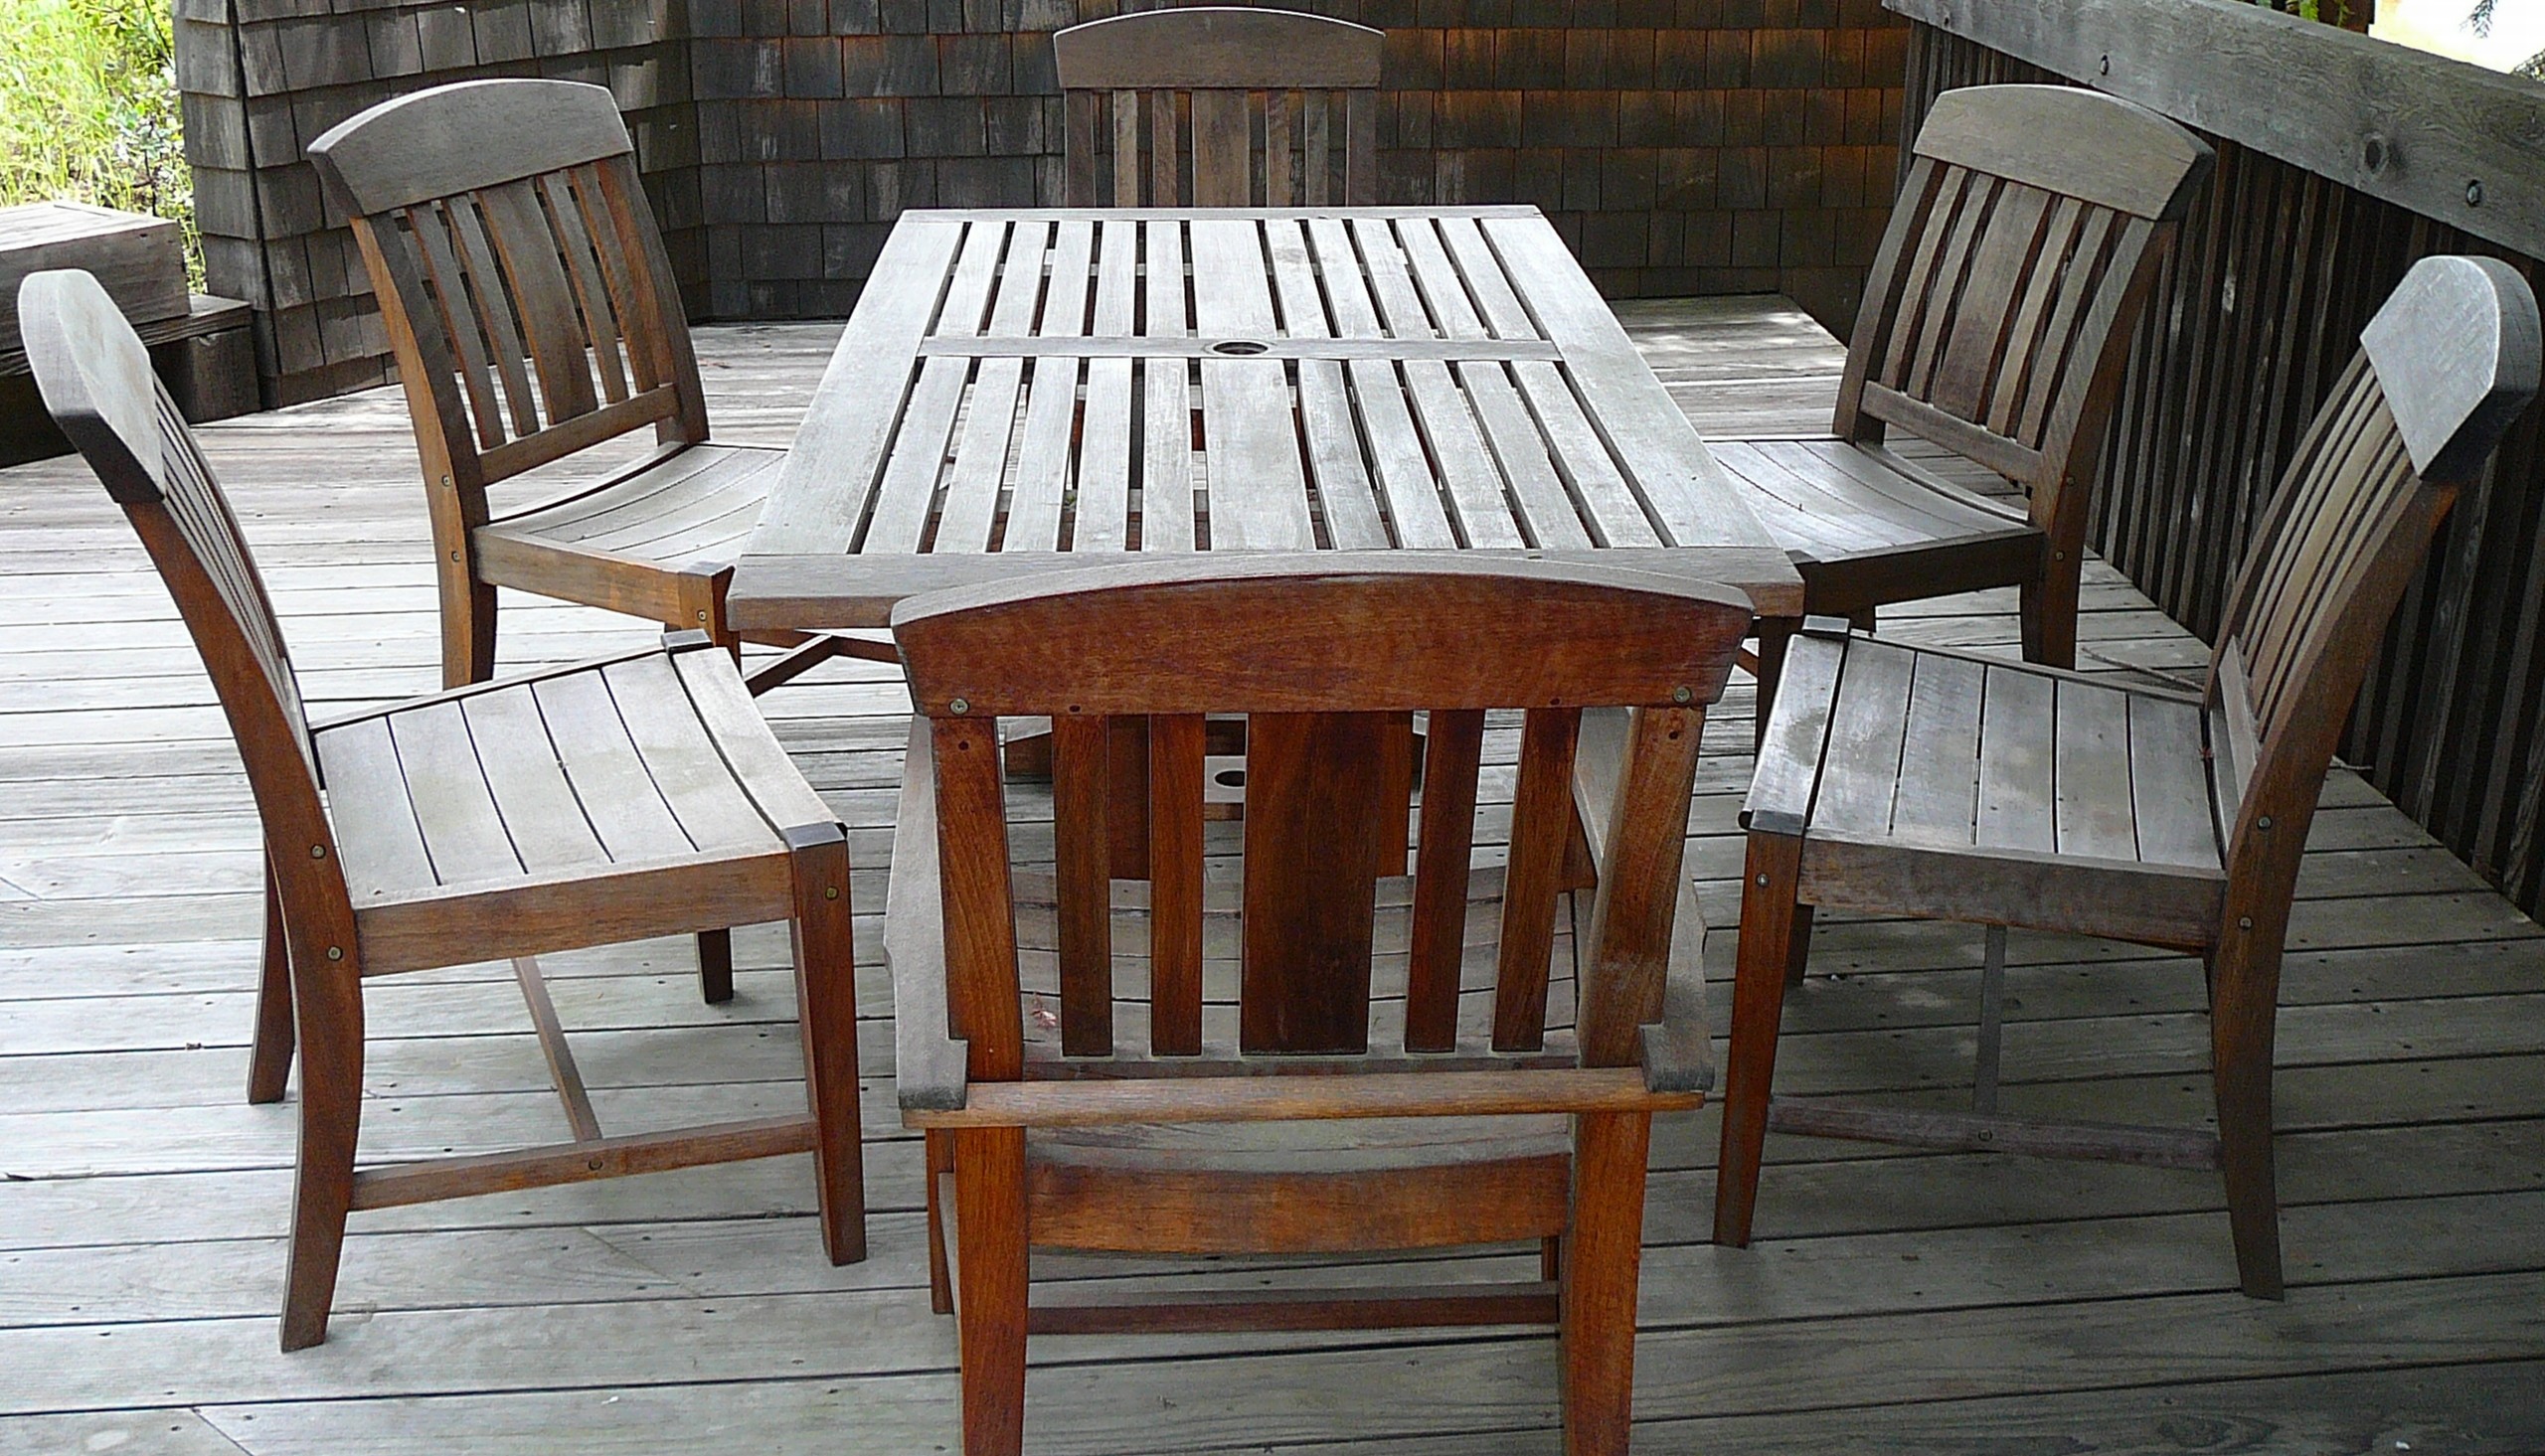 Protecting Teak Furniture From Pests